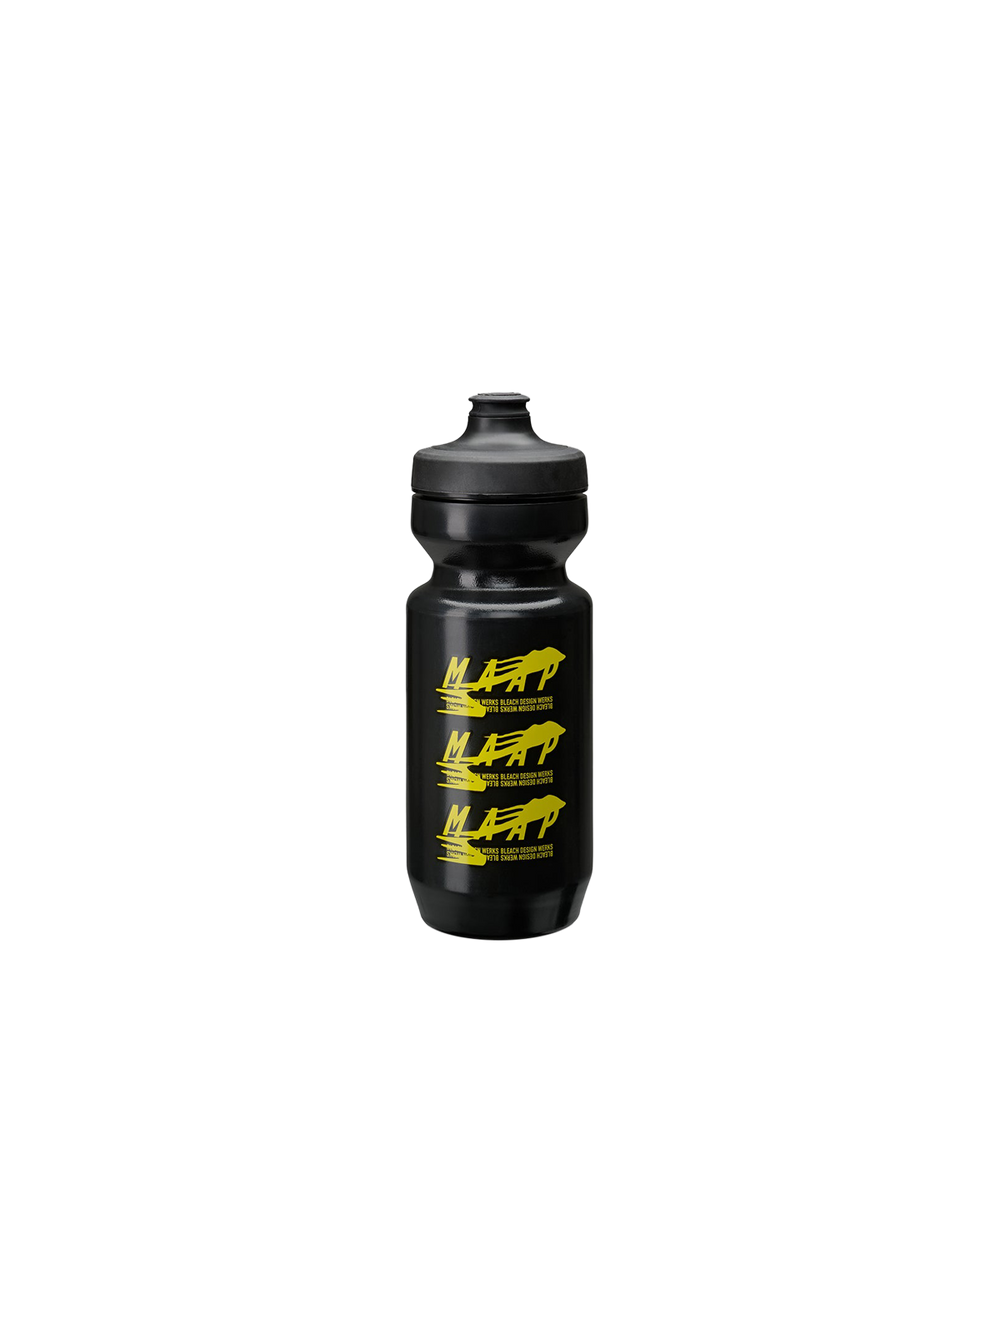 Product Image for MAAP X Bleach Bottle